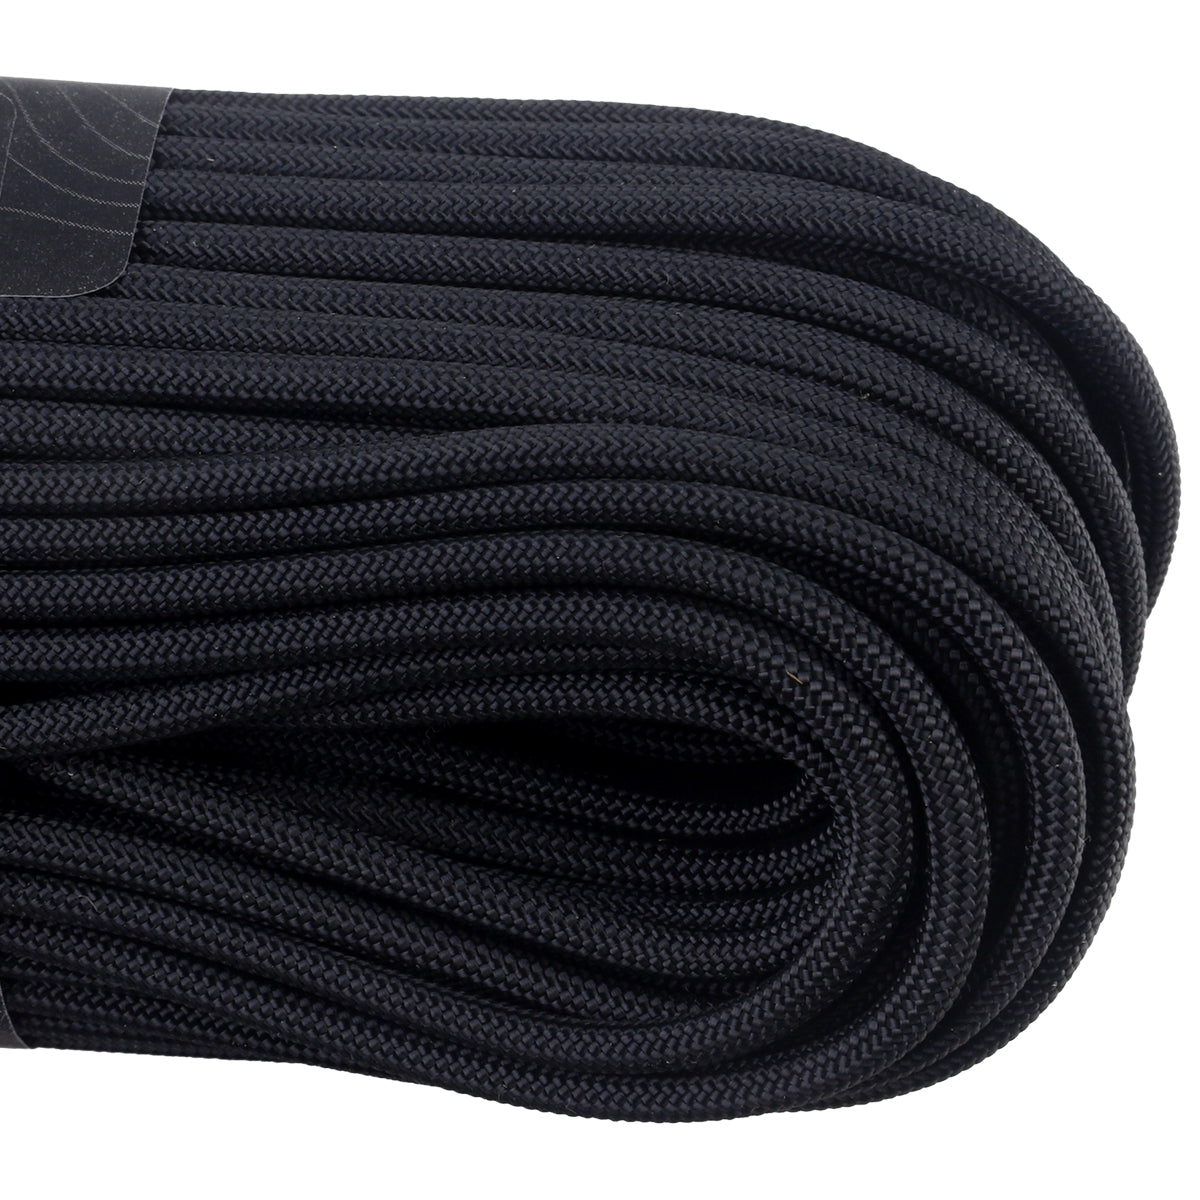  Atwood 100' Paracord Hank – Black : Tactical Paracords :  Sports & Outdoors